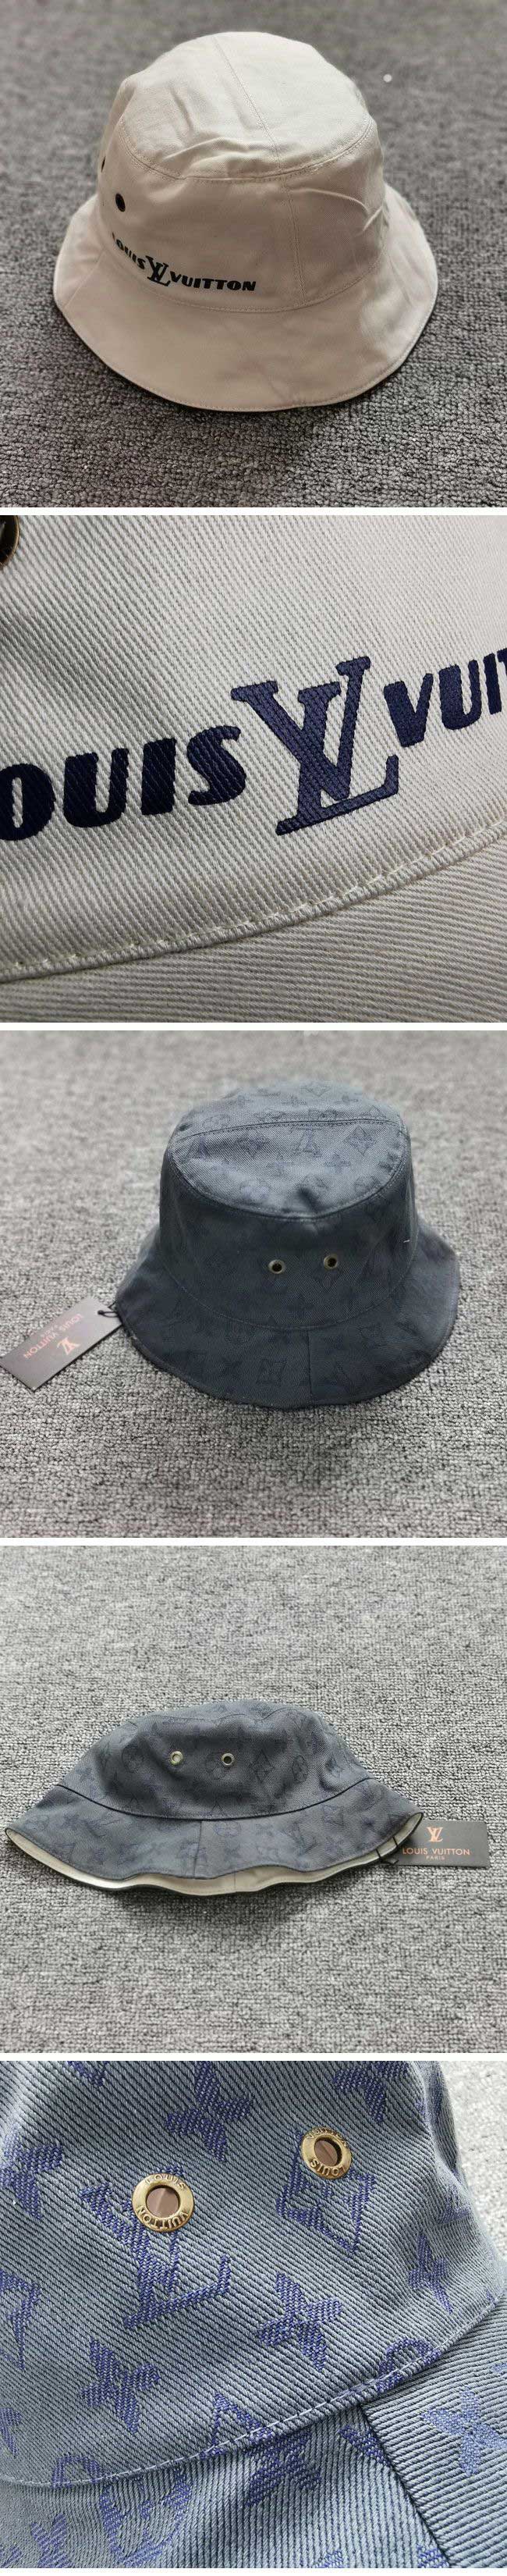 Louis Vuitton Monogram Reversible Bucket Hat ルイヴィトン モノグラム リバーシブル バケット ハット